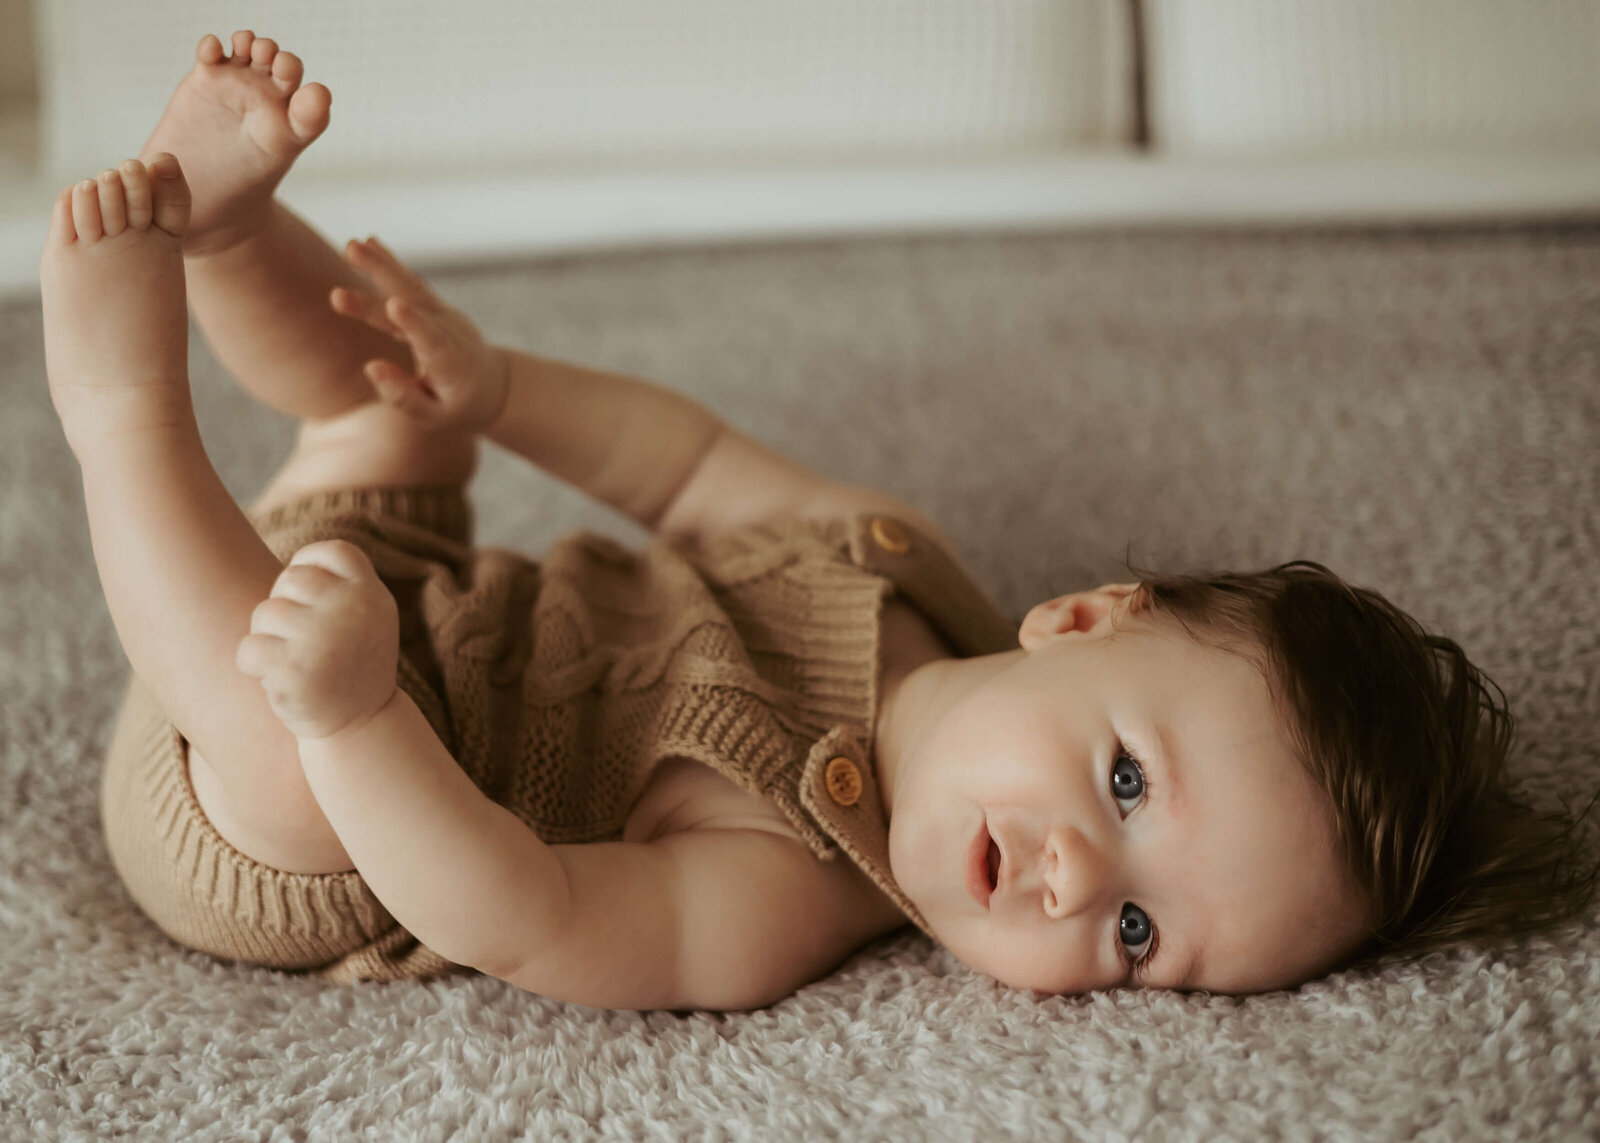 A cute baby with blue eyes and brown hair is staring at the camera while on his back for his in-home photography experience.